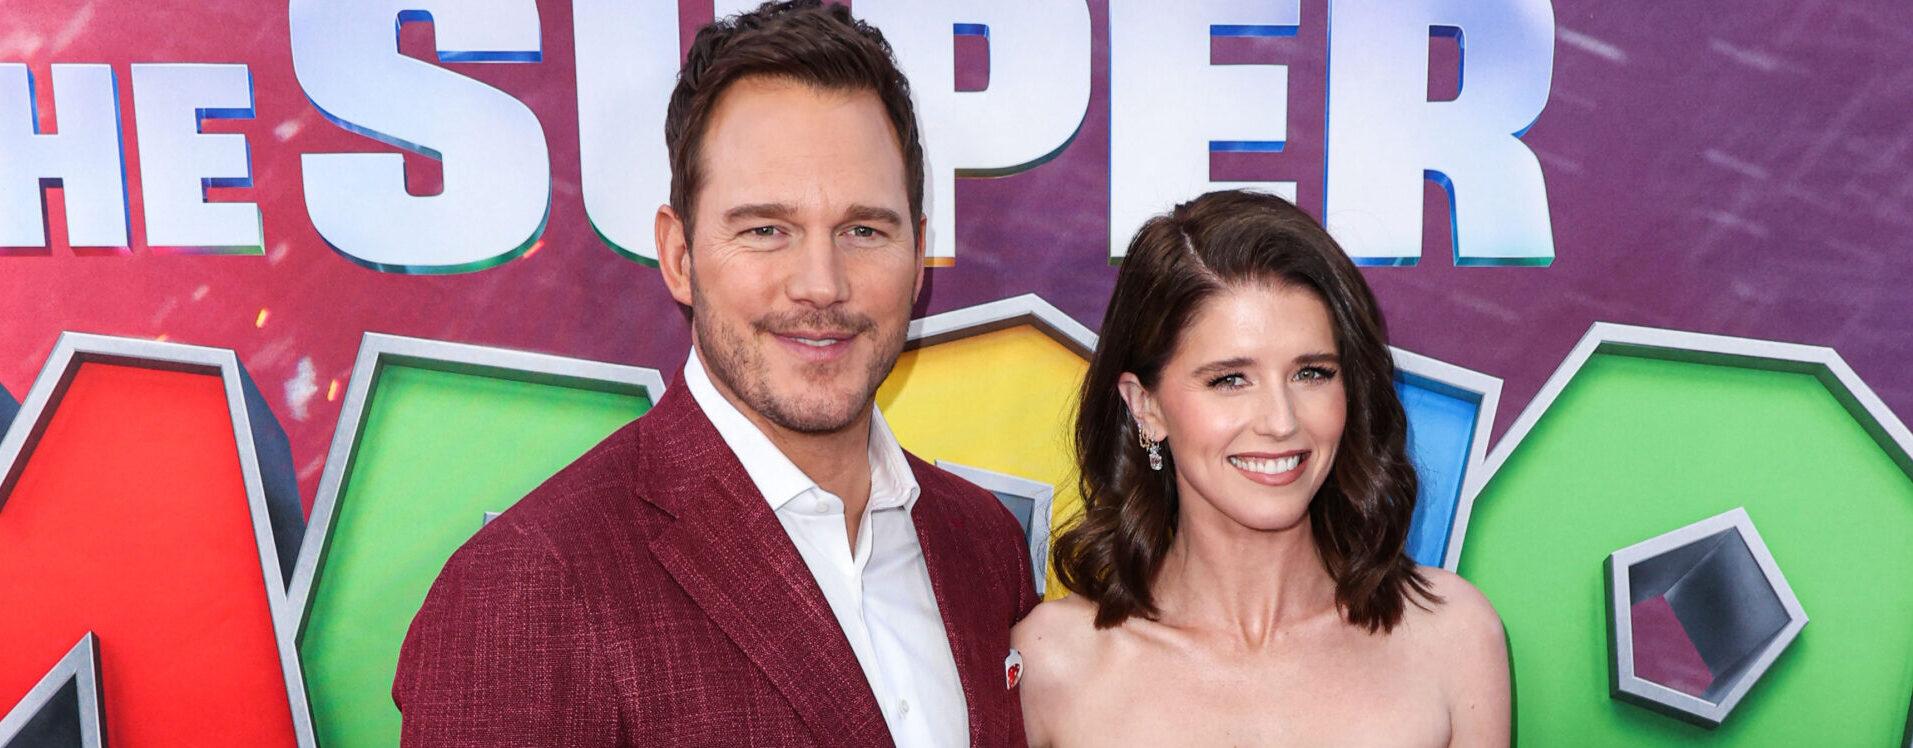 Chris Pratt and wife Katherine Schwarzenegger arrive at the Los Angeles Special Screening Of Universal Pictures, Nintendo And Illumination Entertainment's 'The Super Mario Bros. Movie'